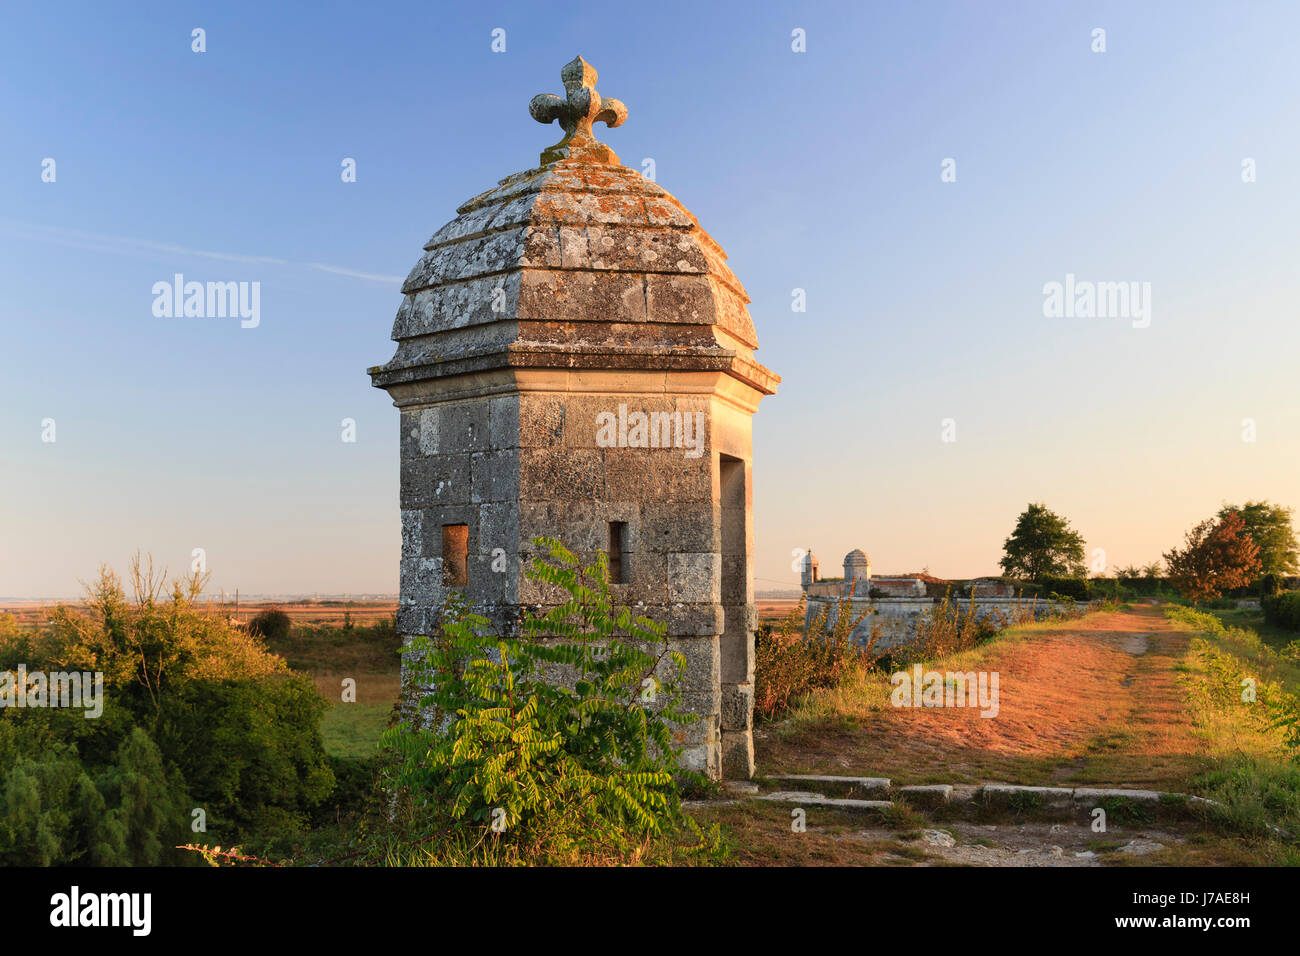 France, Charente Maritime, Hiers Brouage, Citadel of Brouage, walls and turrets Stock Photo